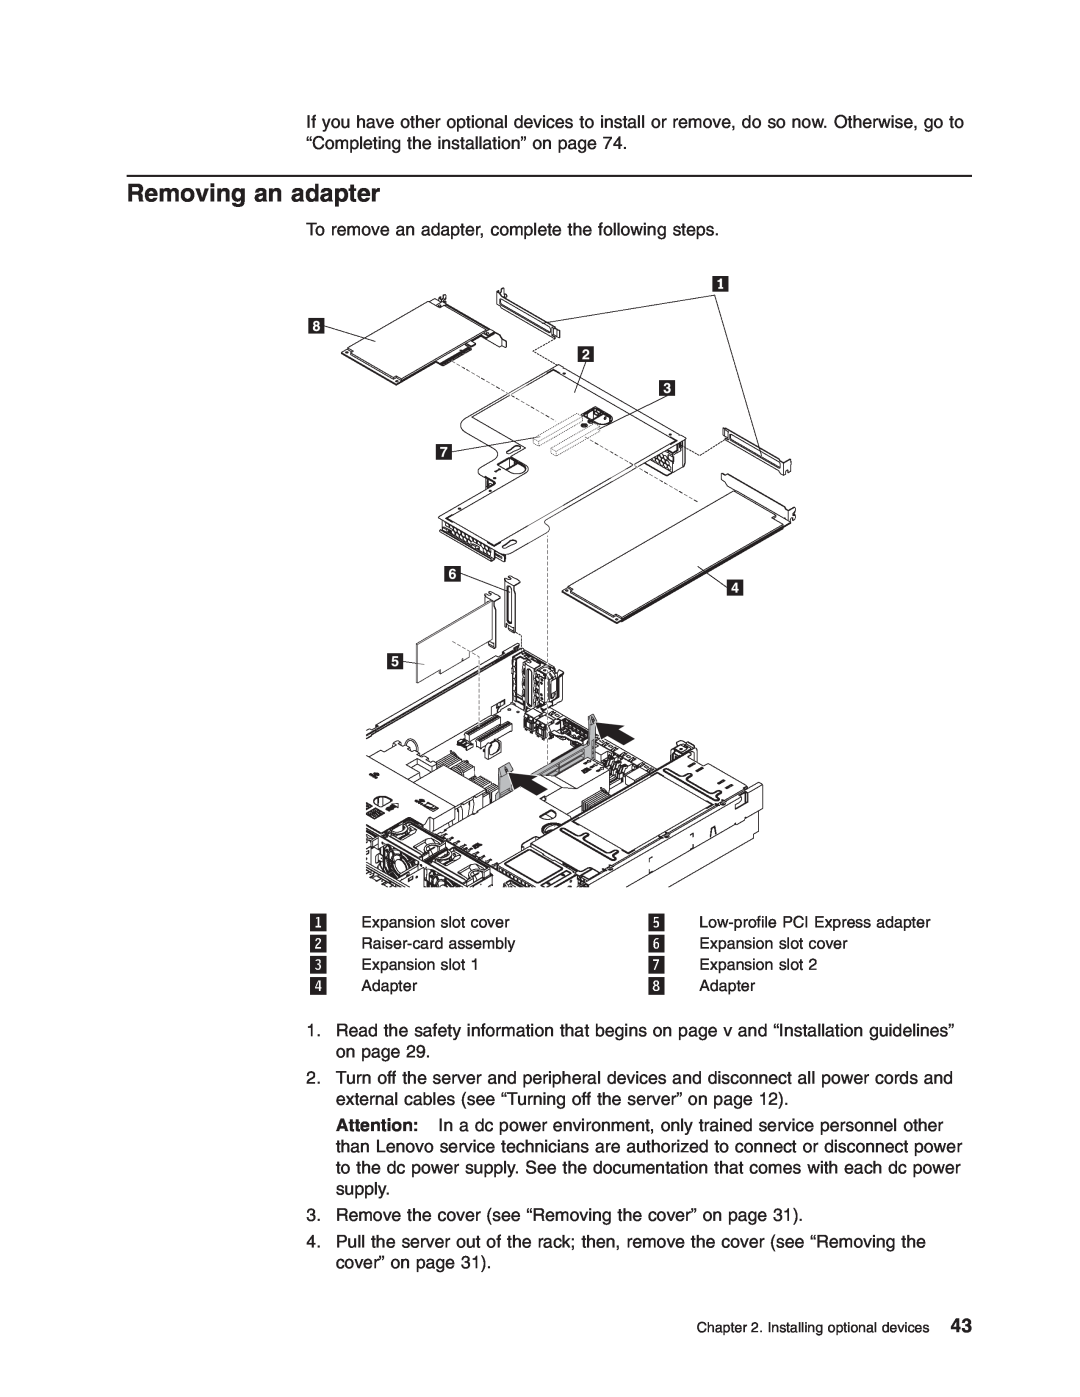 Lenovo RD120 manual Removing an adapter, Expansion slot cover, Raiser-cardassembly, Adapter 